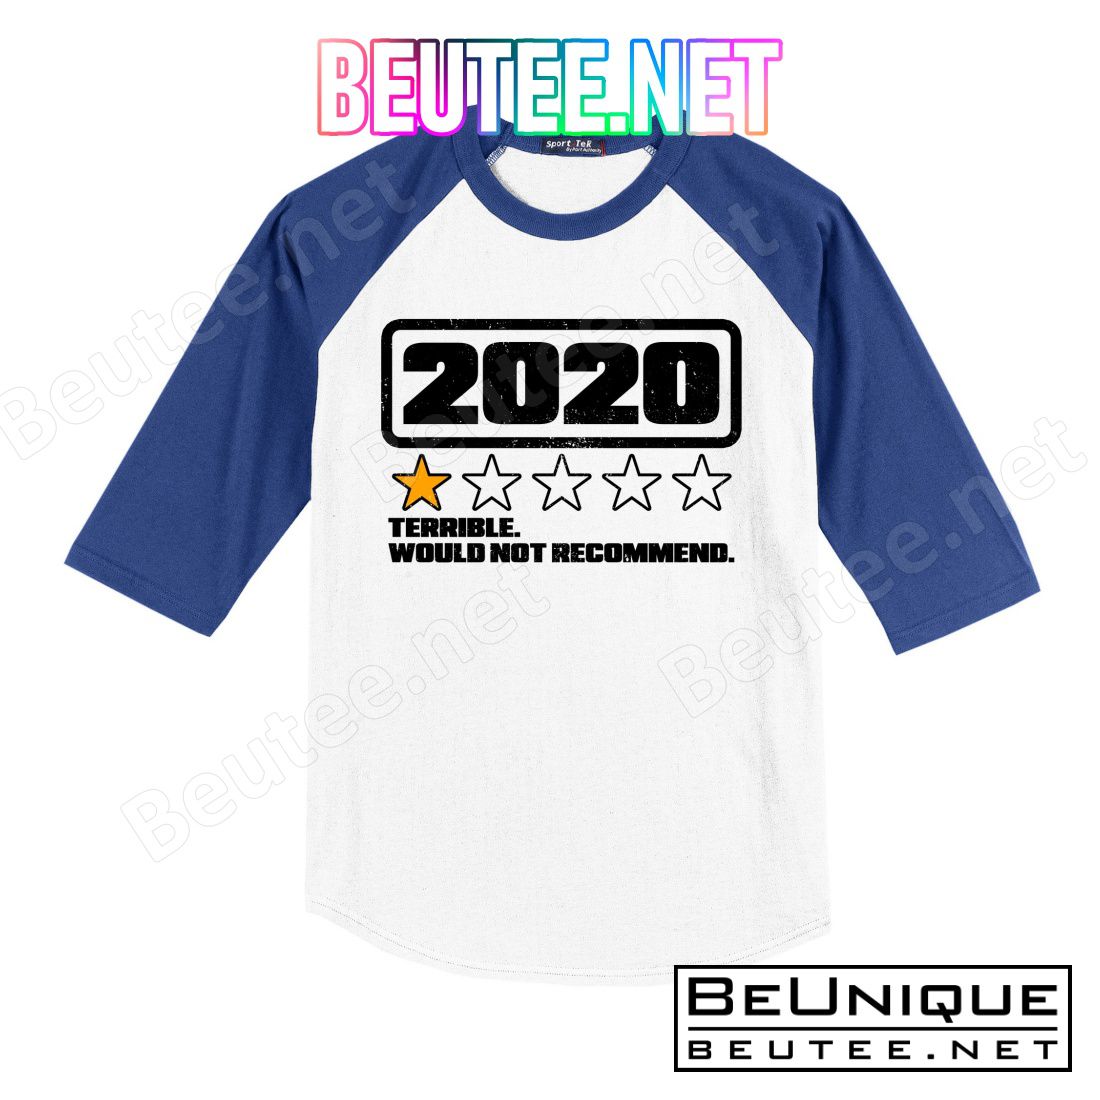 2020 Terrible Would Not Recommend One Star Rating T-Shirts, Tank Top, Long Sleeve